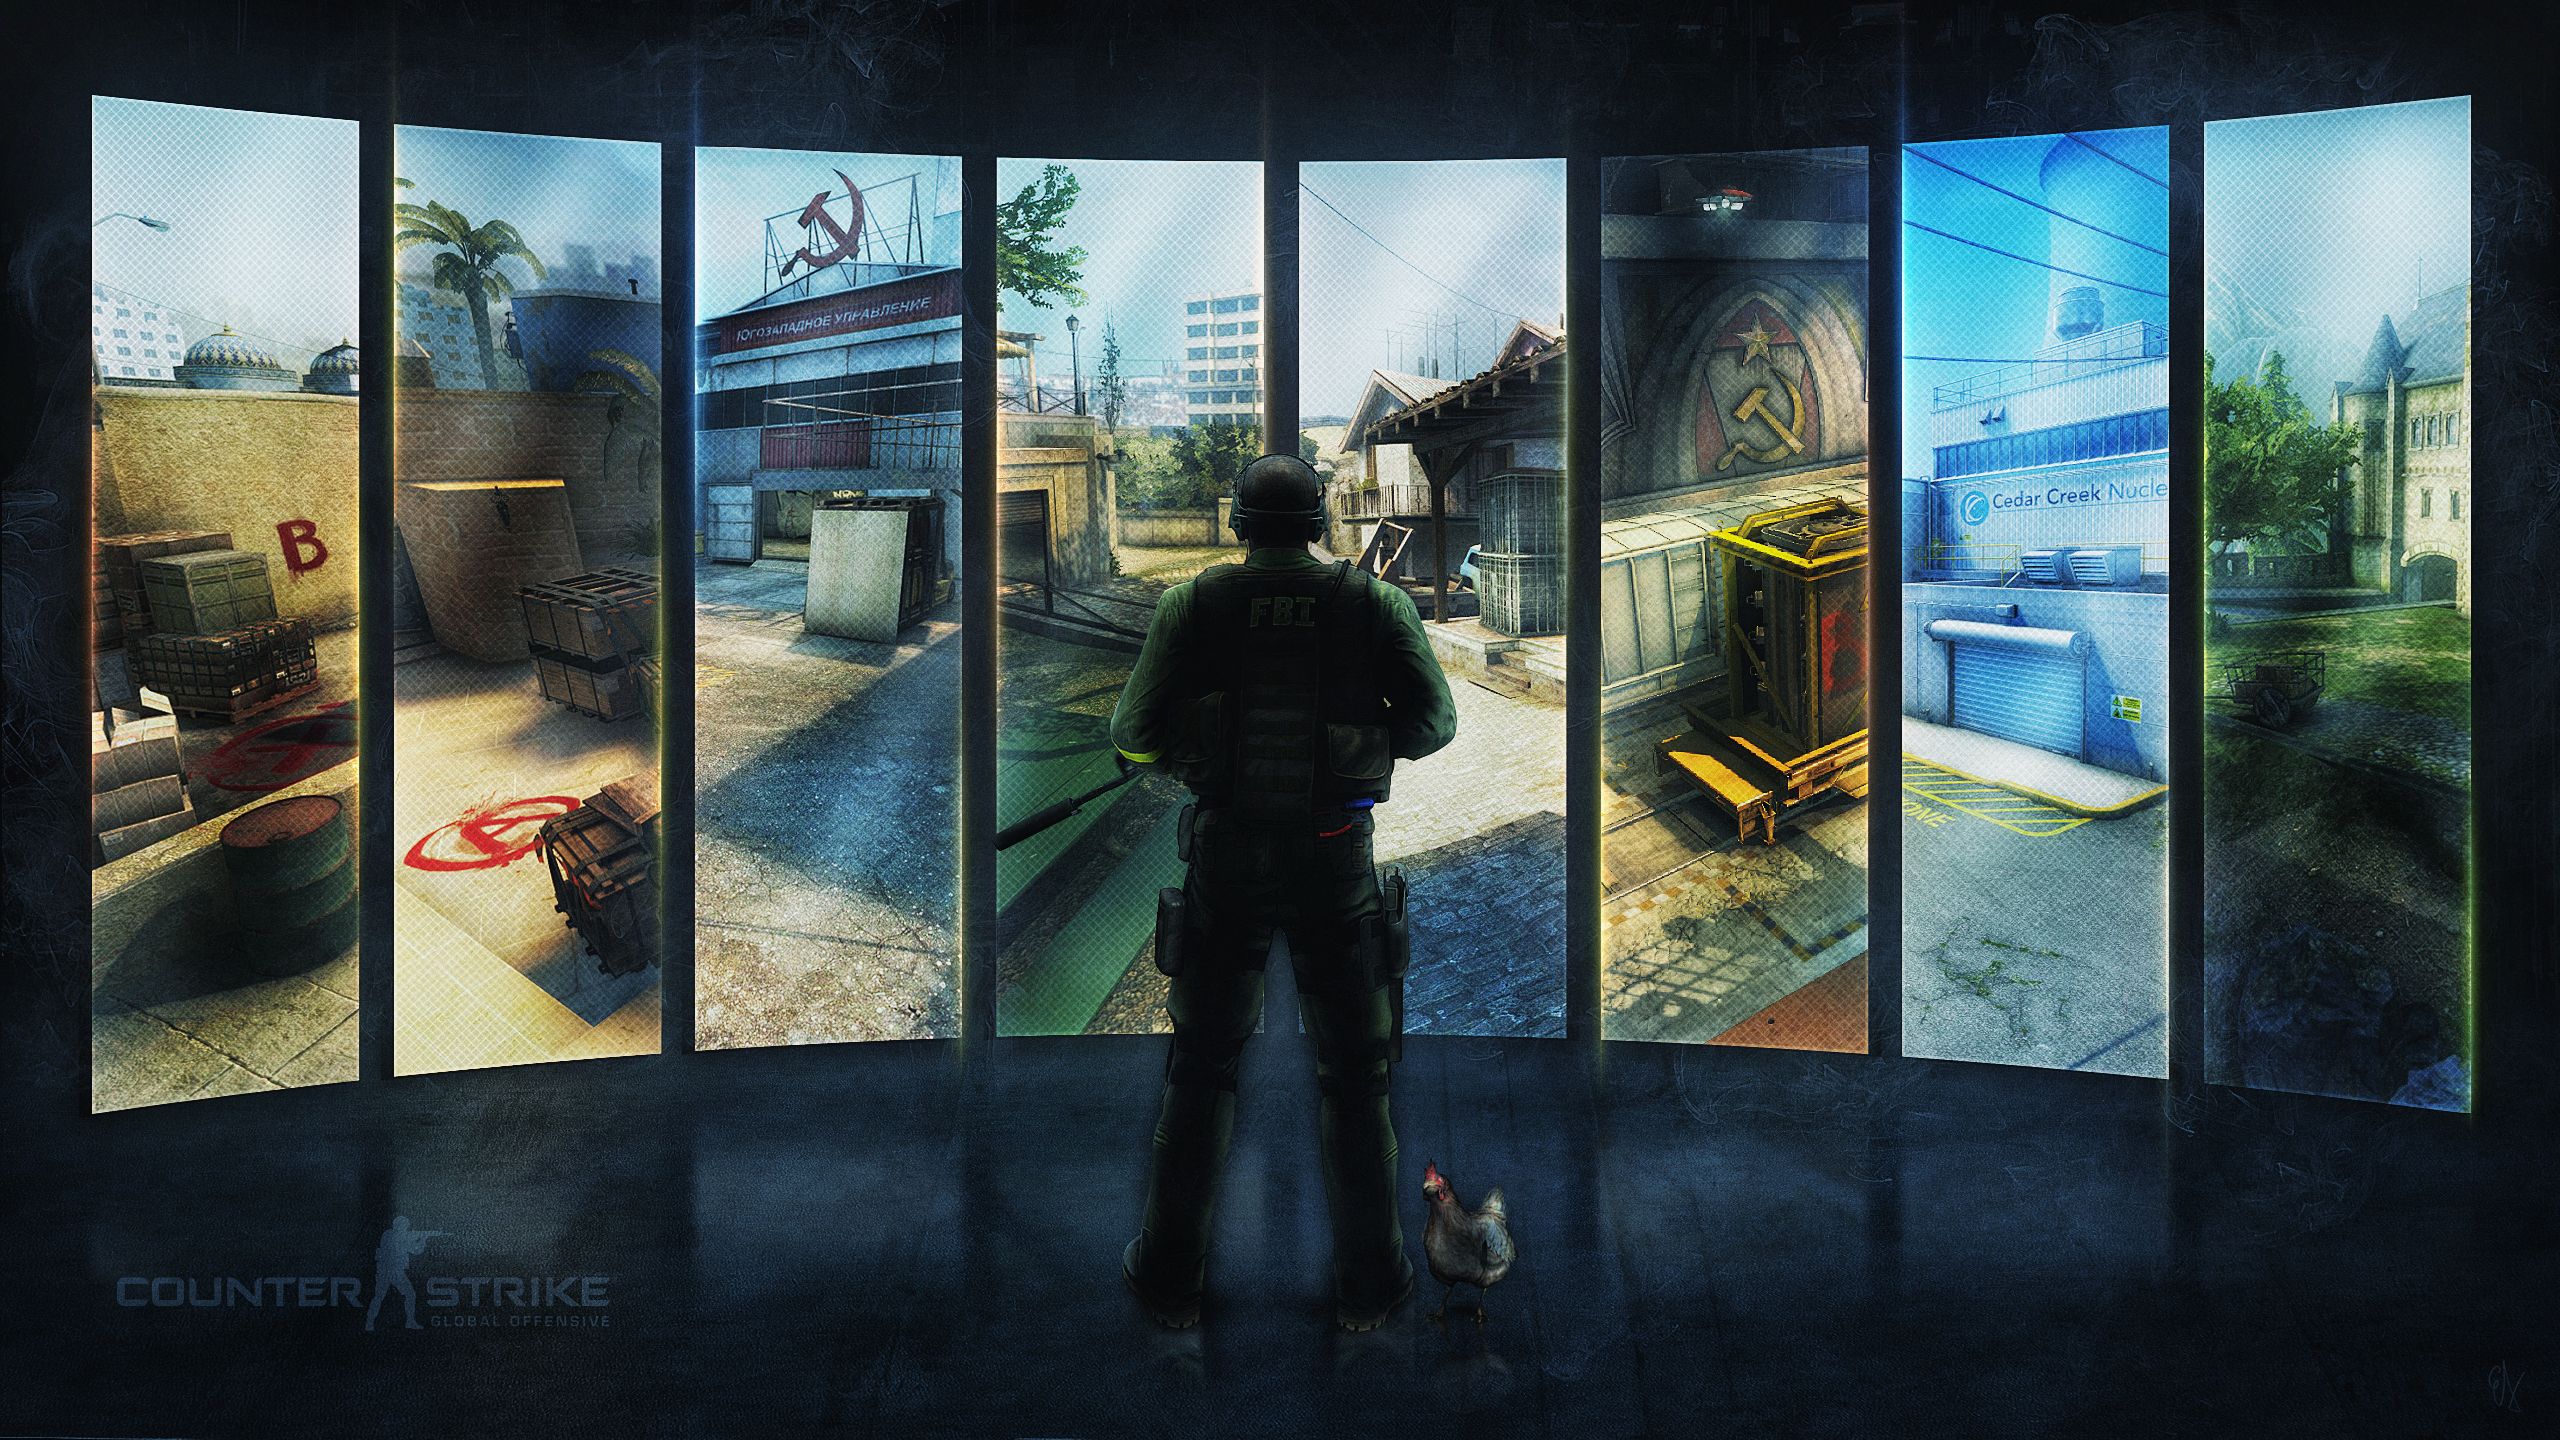 counter strike, video game, counter strike: global offensive